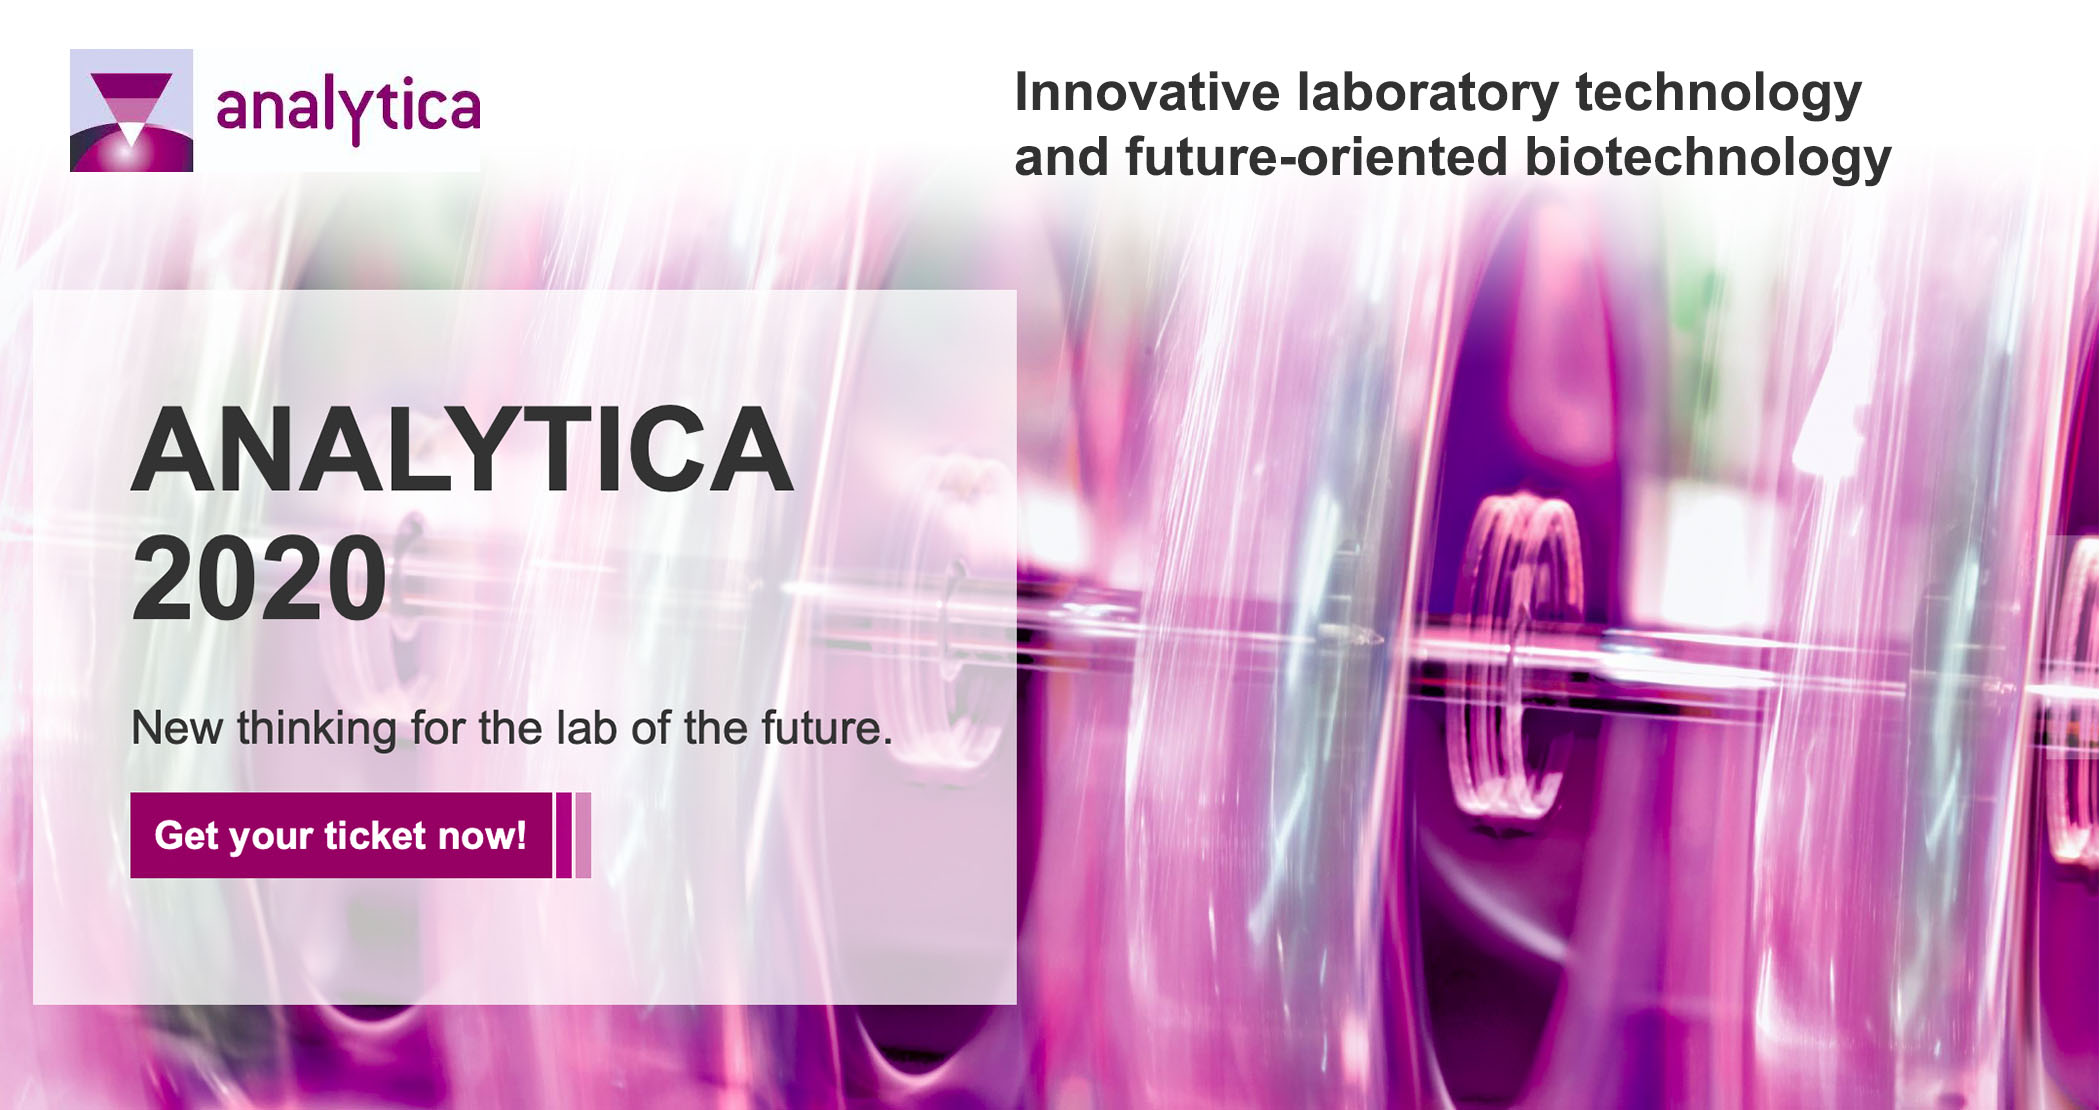 Analytica 2020, exhibition and conference